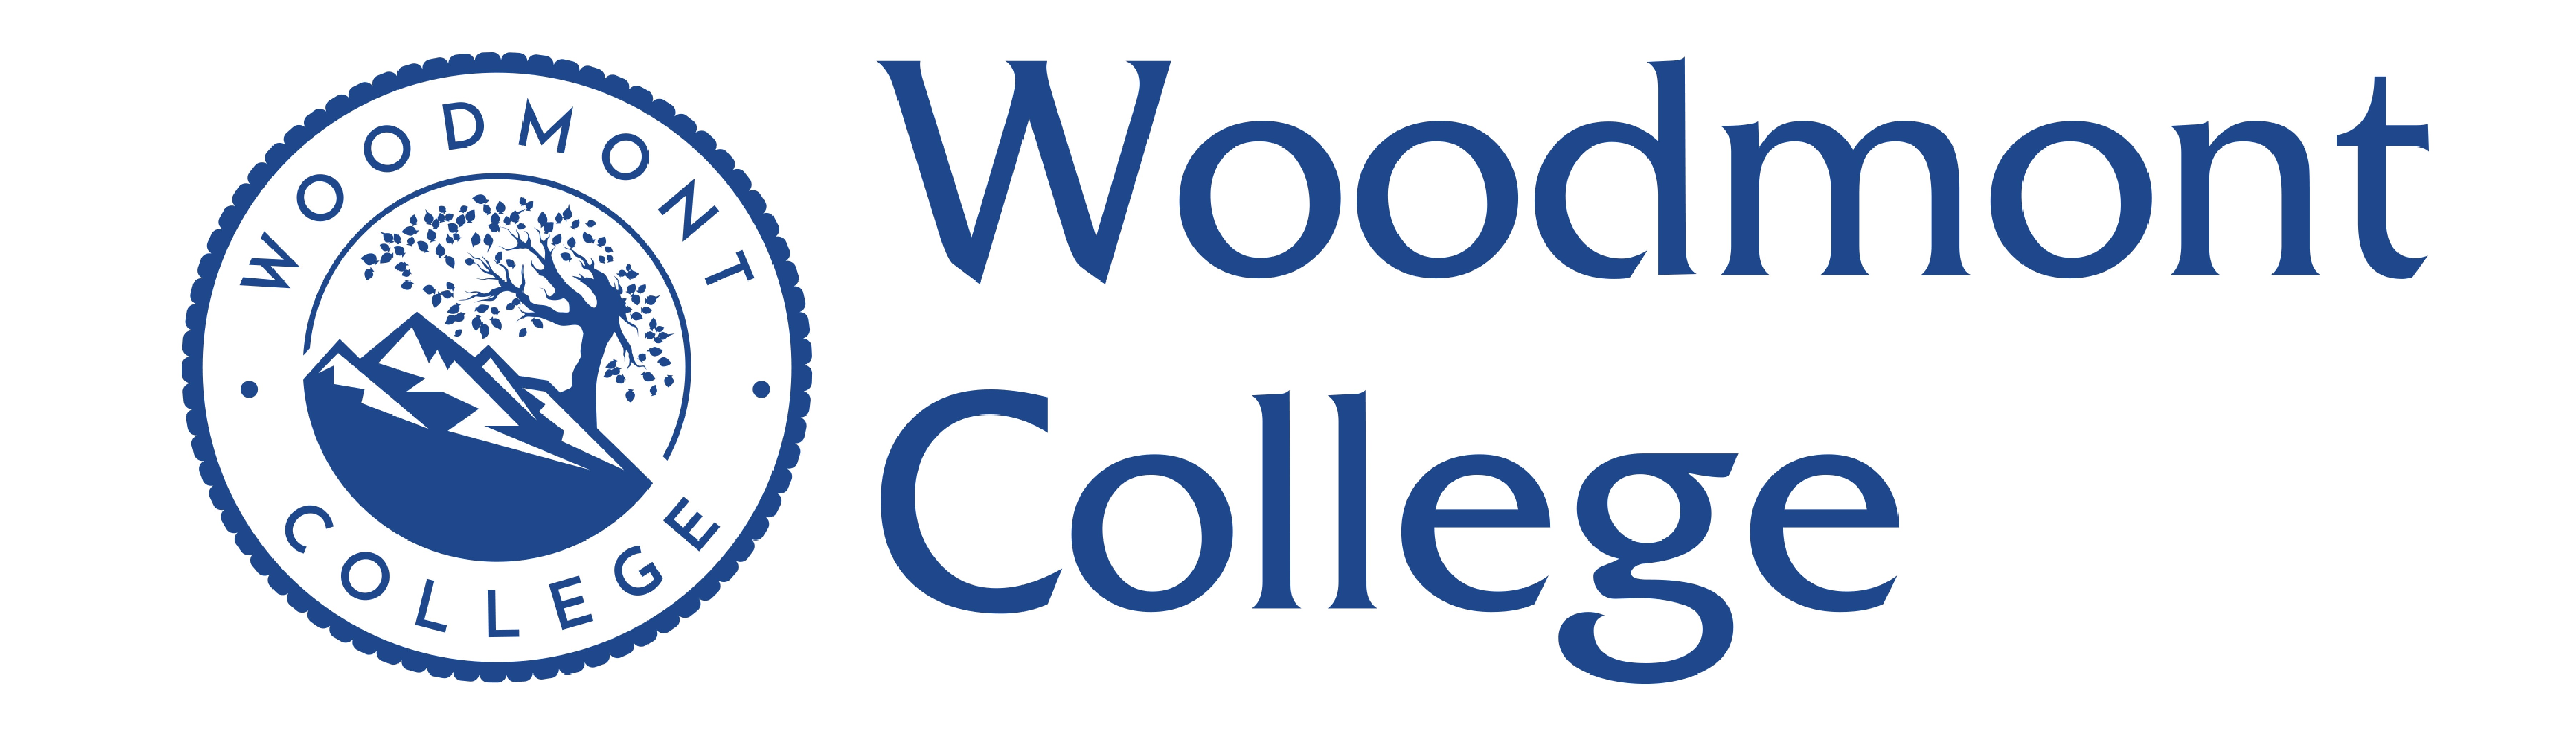 Woodmont College